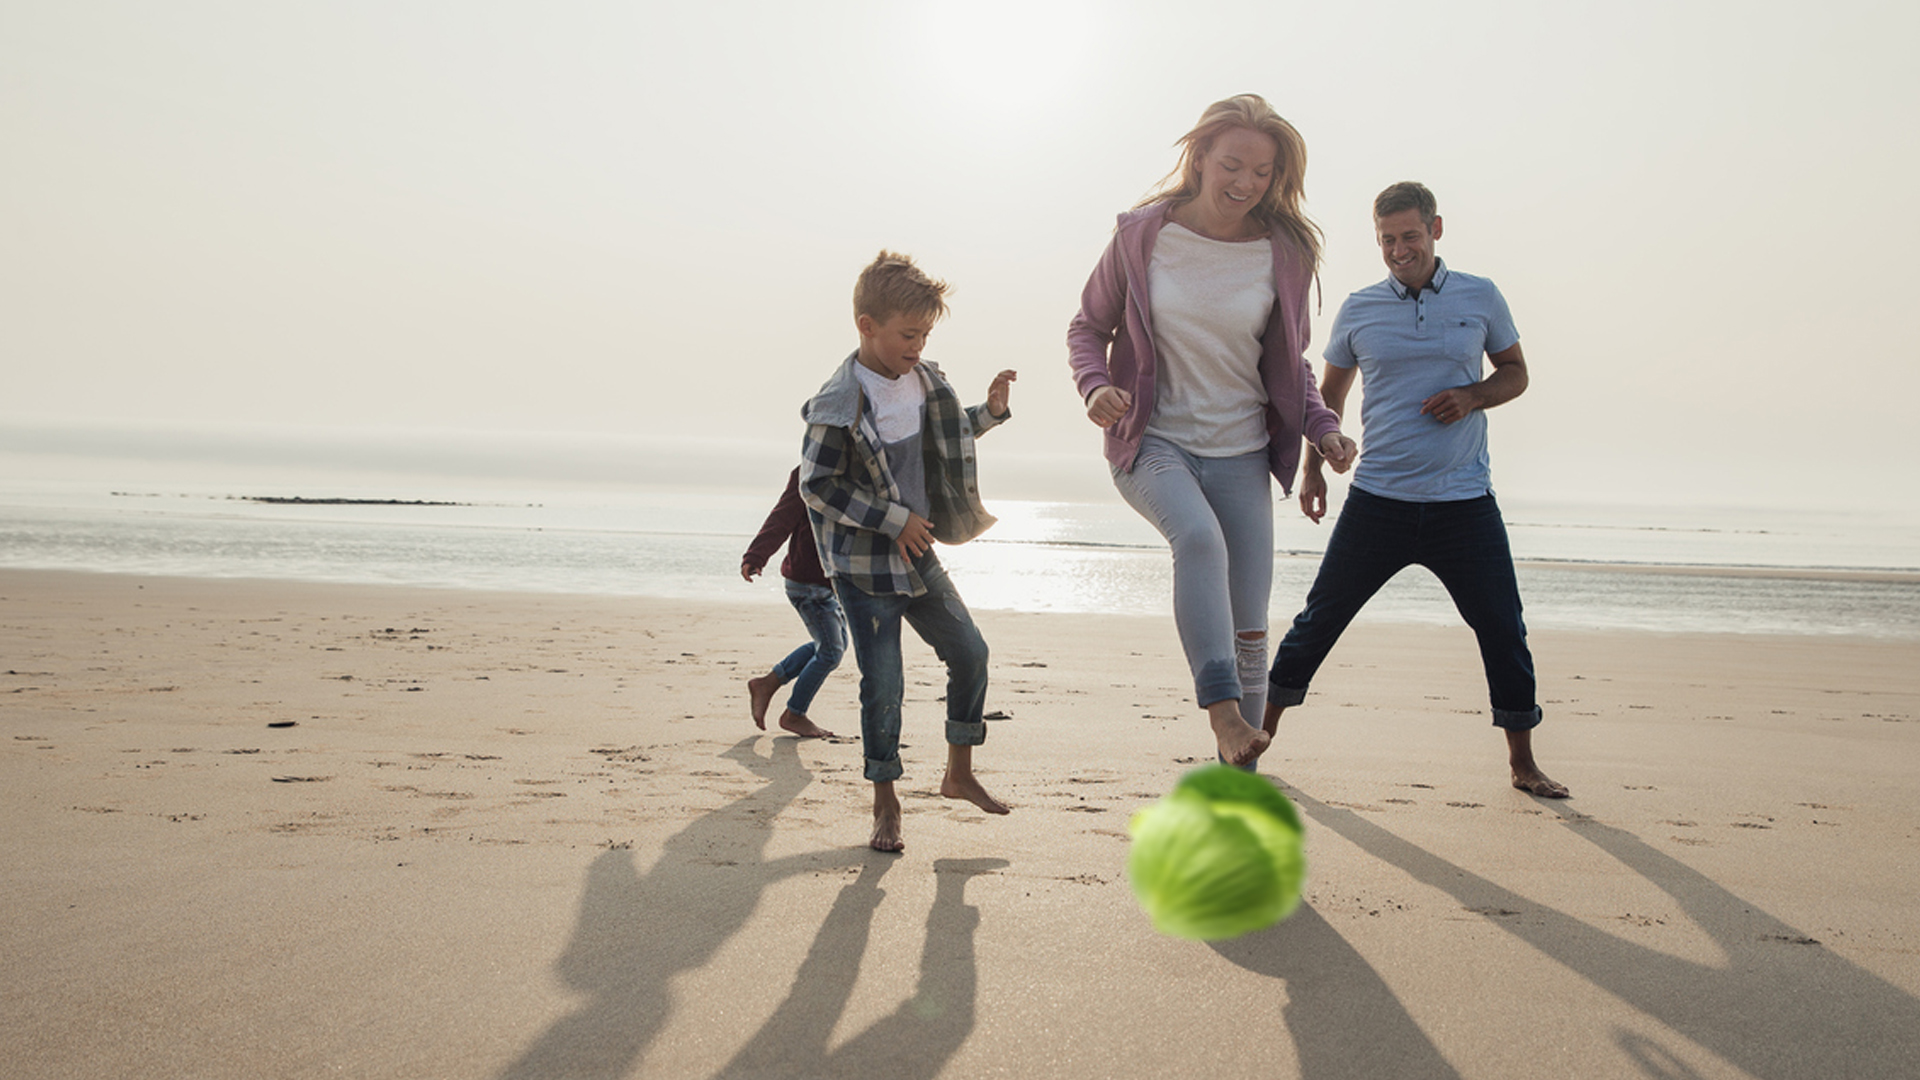 A family kicking a cabbage around on the beach